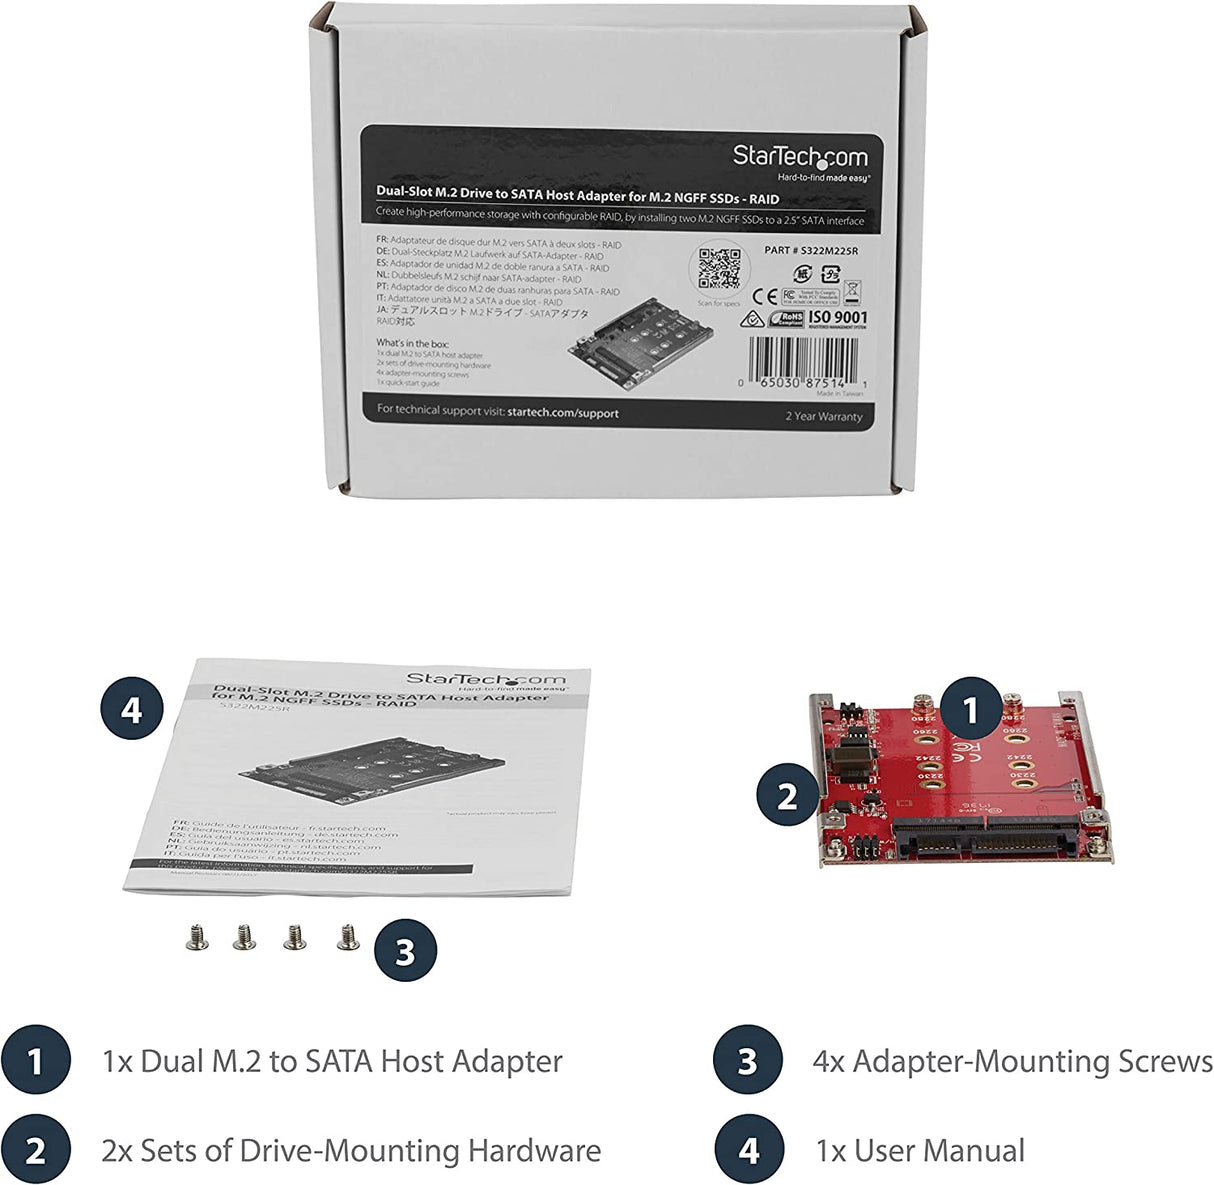 StarTech.com M.2 to SATA Adapter - Dual Slot - for 2.5in Drive Bay - RAID - M.2 SSD - M.2 Adapter - M.2 SSD Adapter (S322M225R) 2.5in SATA Dual M.2 (SATA) Drive